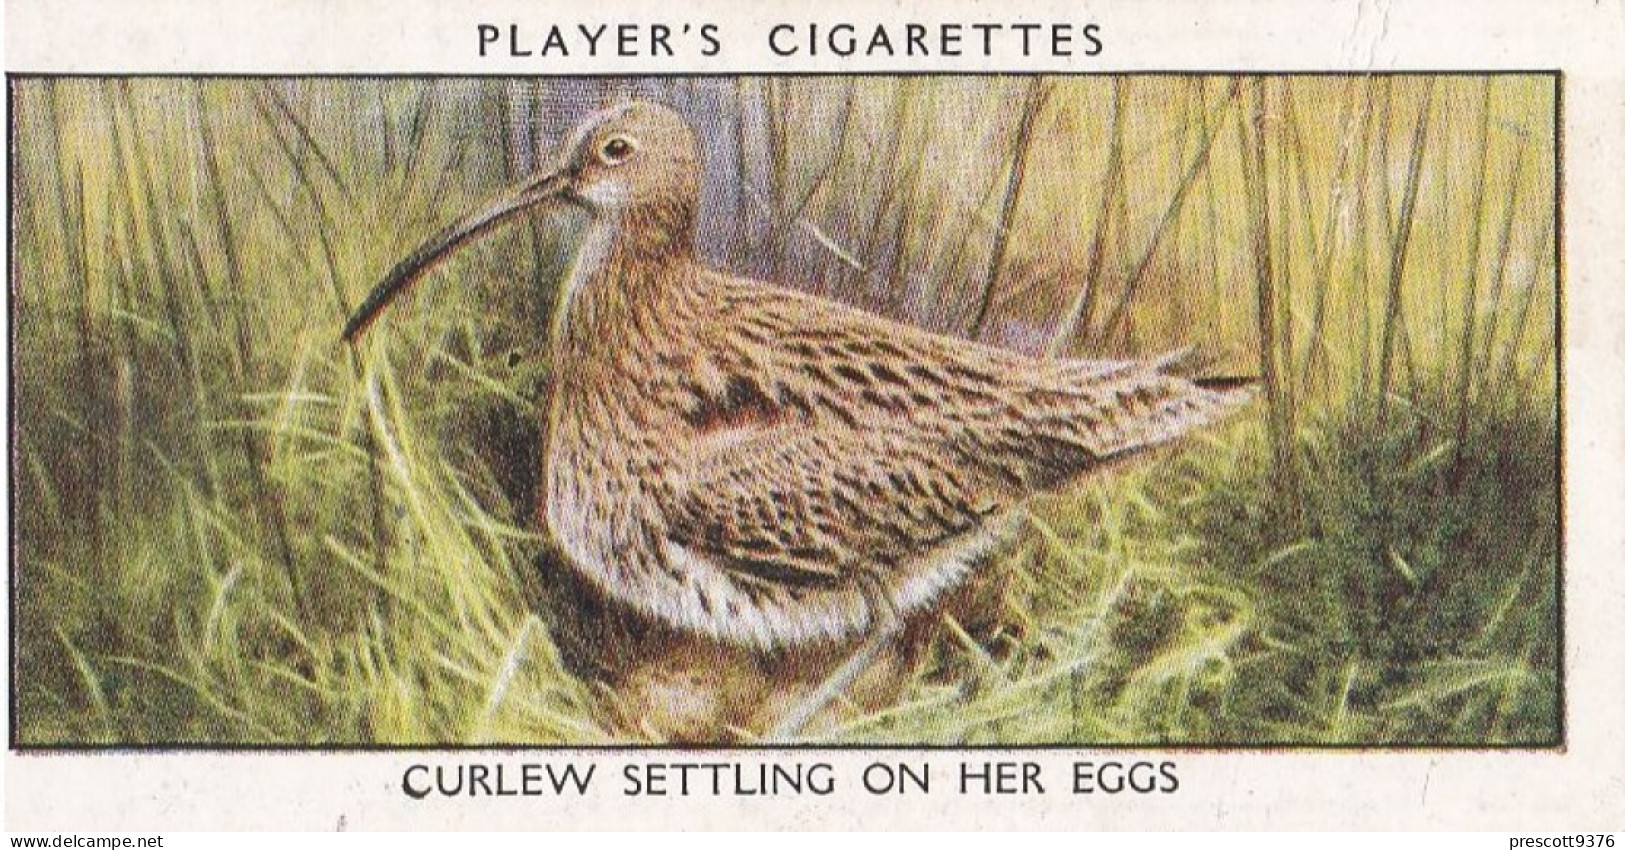 Wild Birds 1932 - Original Players Cigarette Card - 8 Curlew Sitting On Eggs - Player's